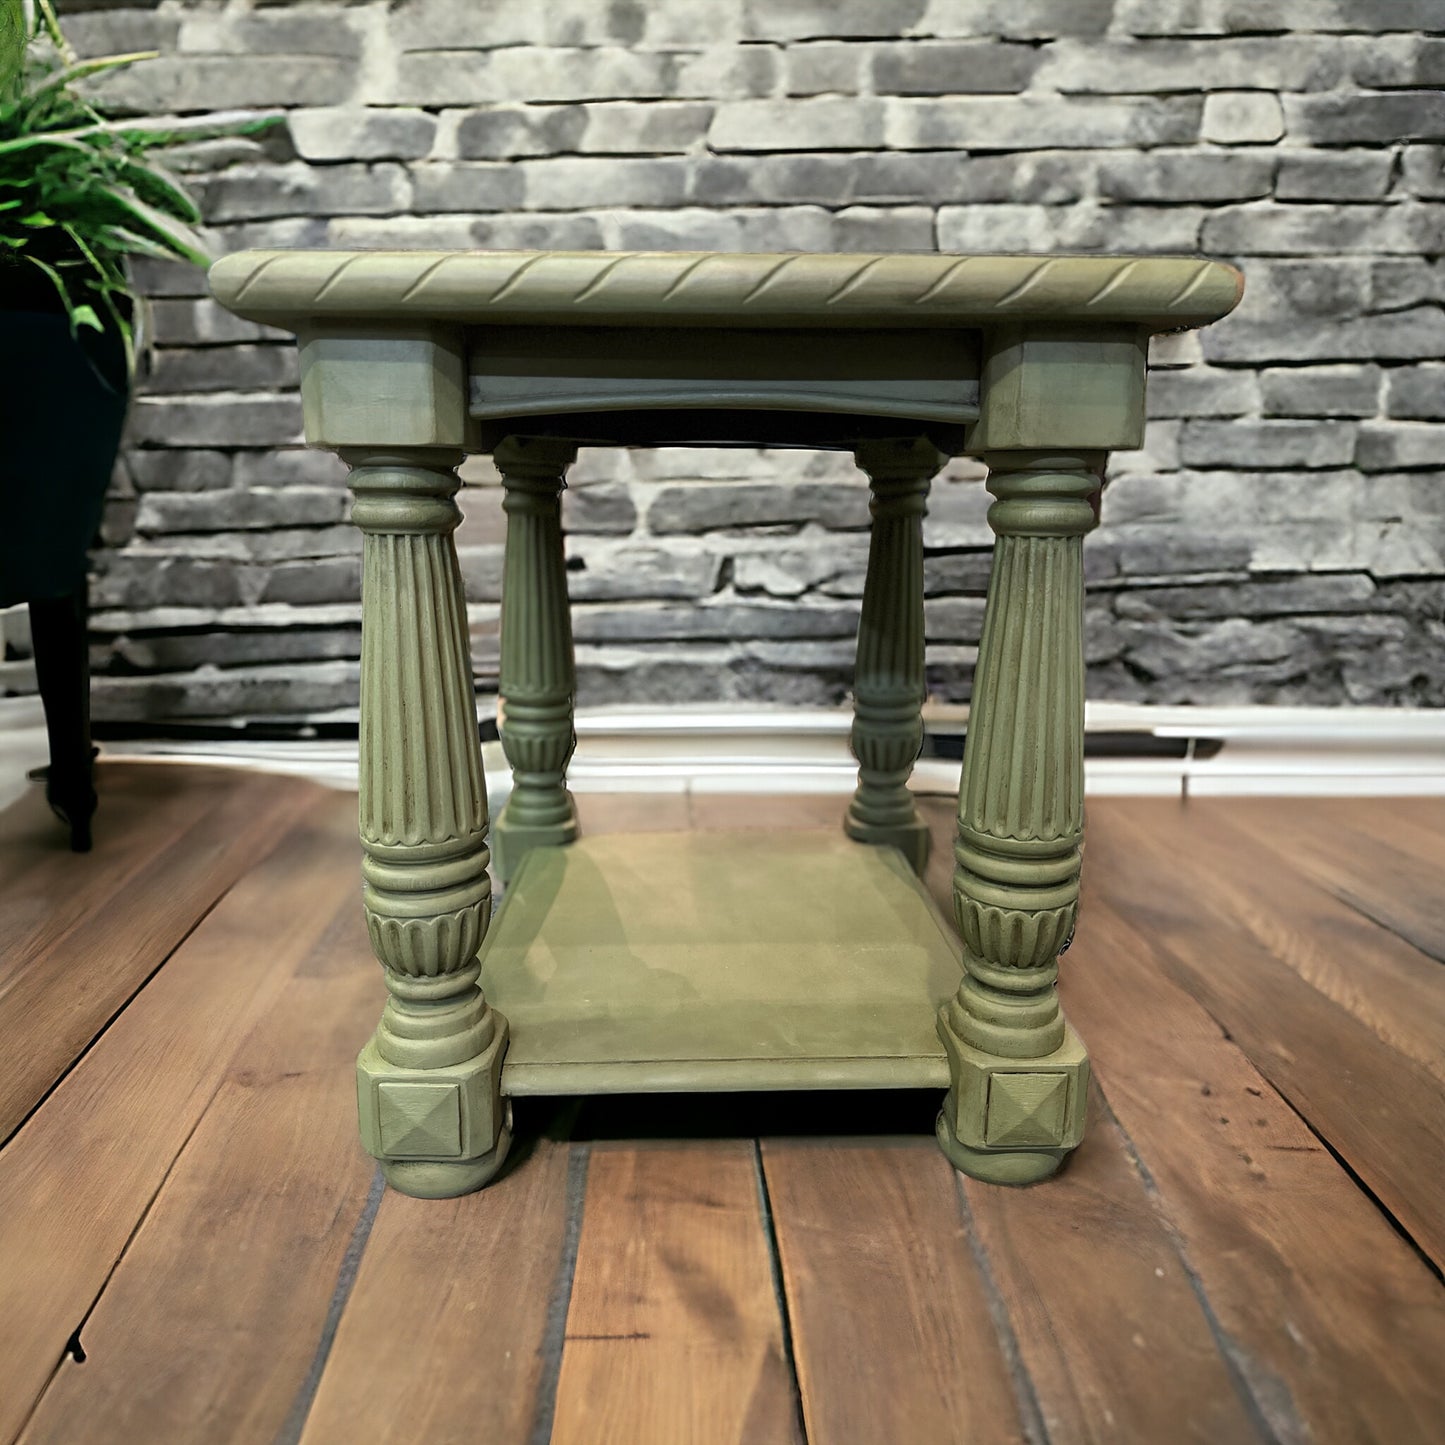 Beautiful Annie Sloan Olive Hand Painted Side Table. Protected with clear wax and dark wax used for antiquing. Stunning. 